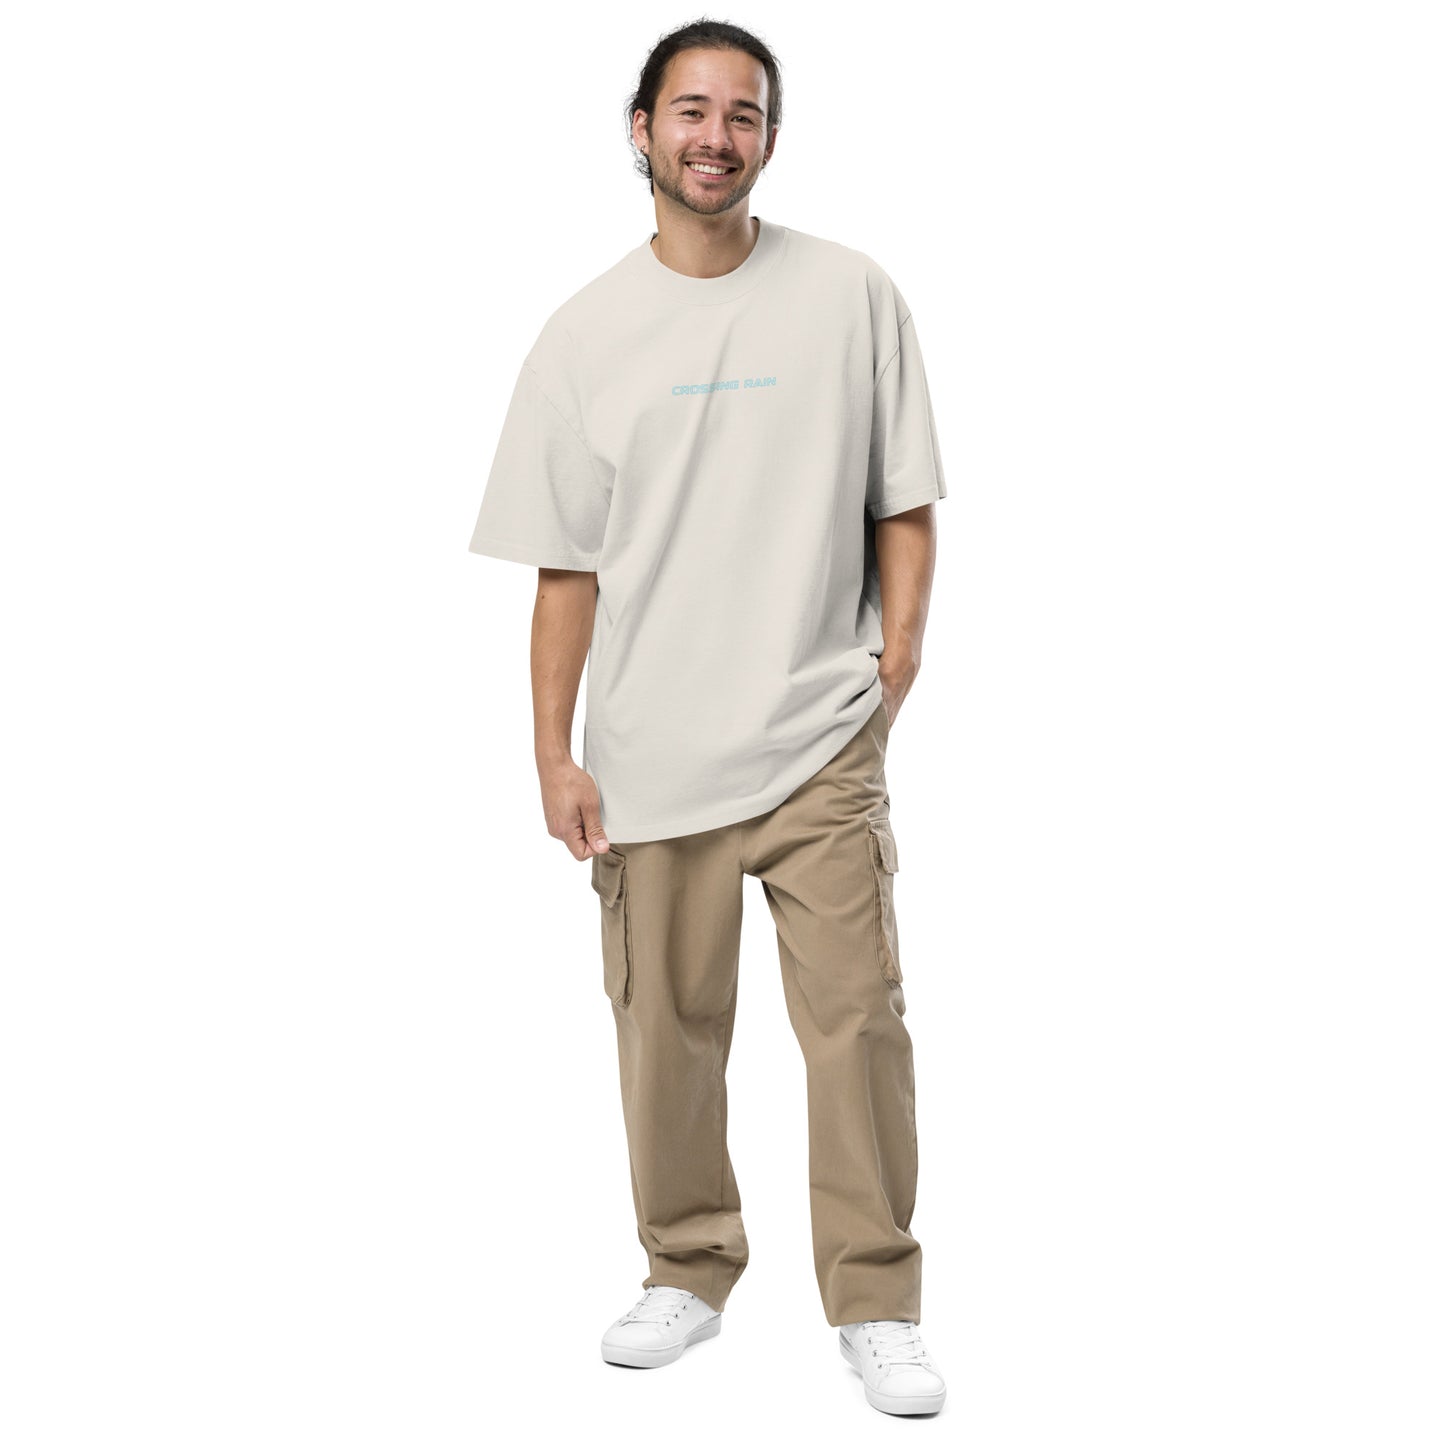 XR -- Oversized faded t-shirt